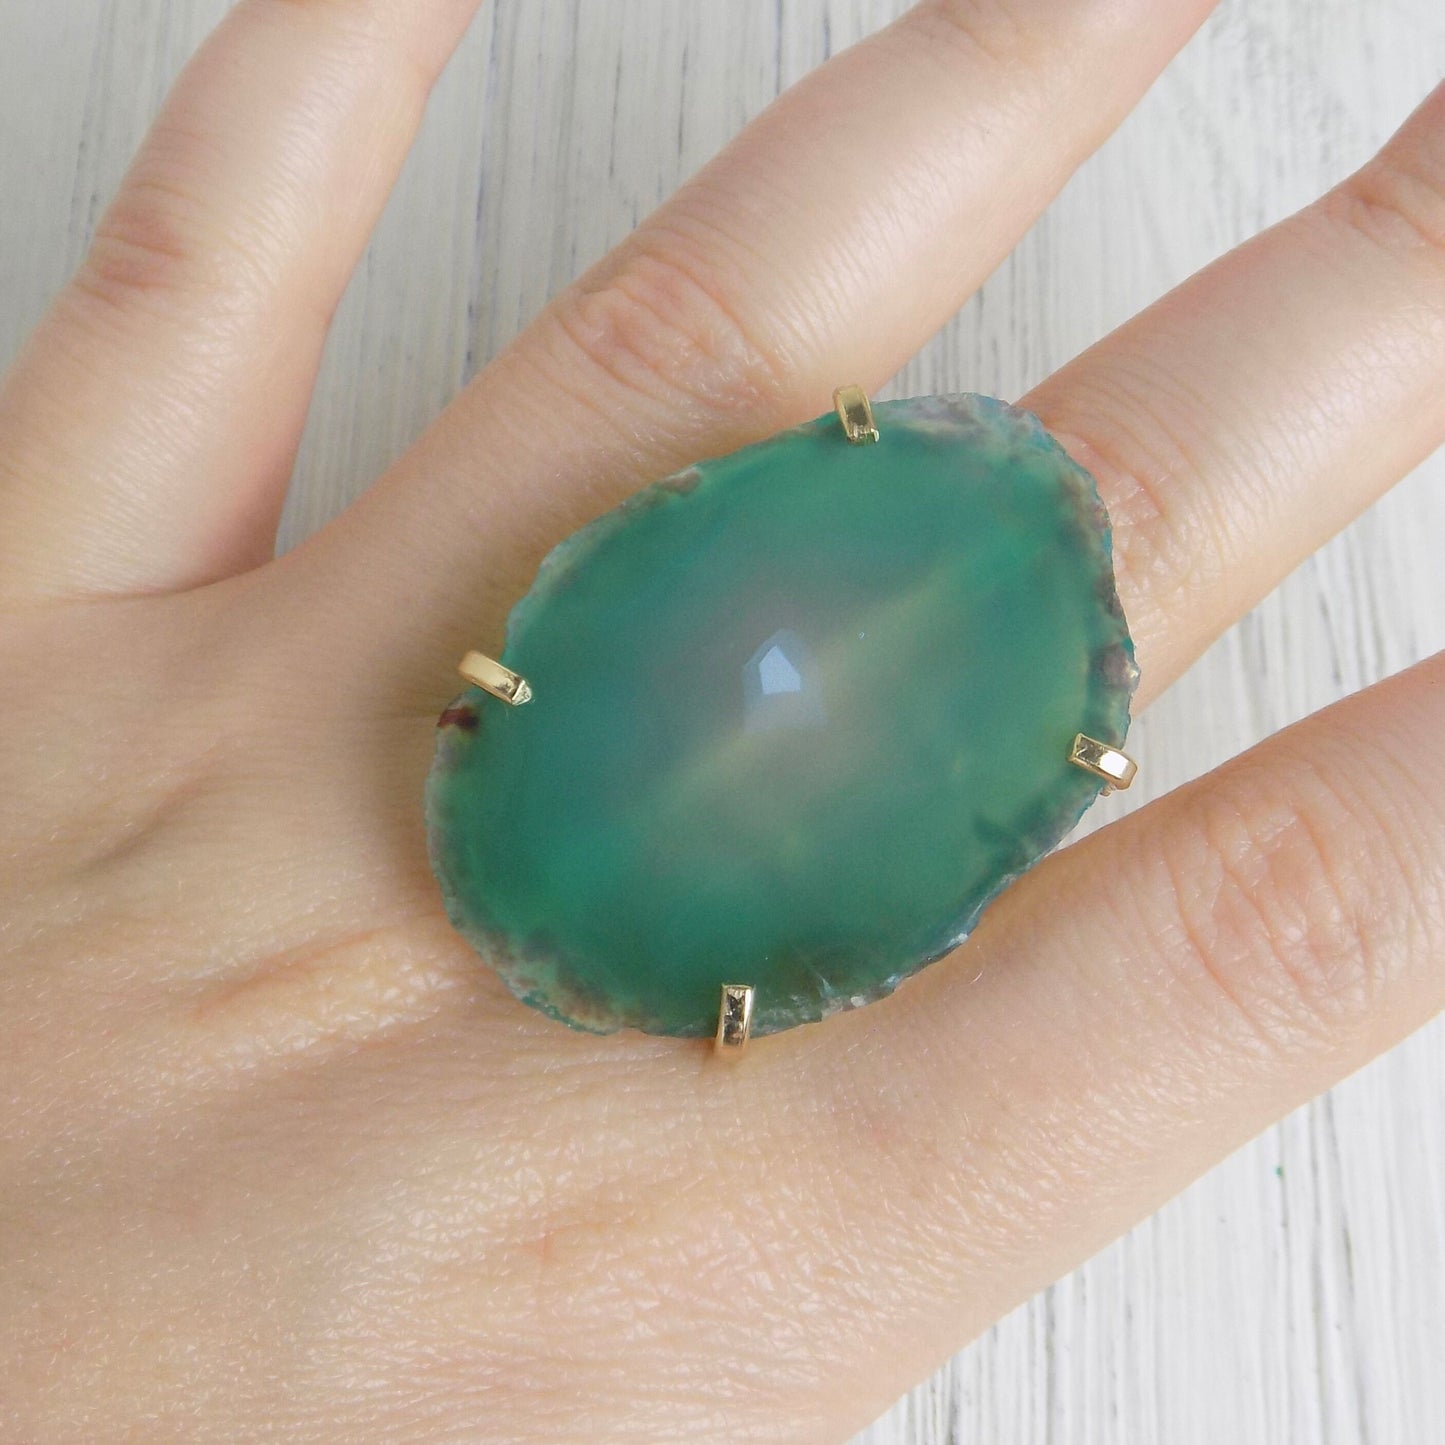 Unique Ring - Green Agate Ring